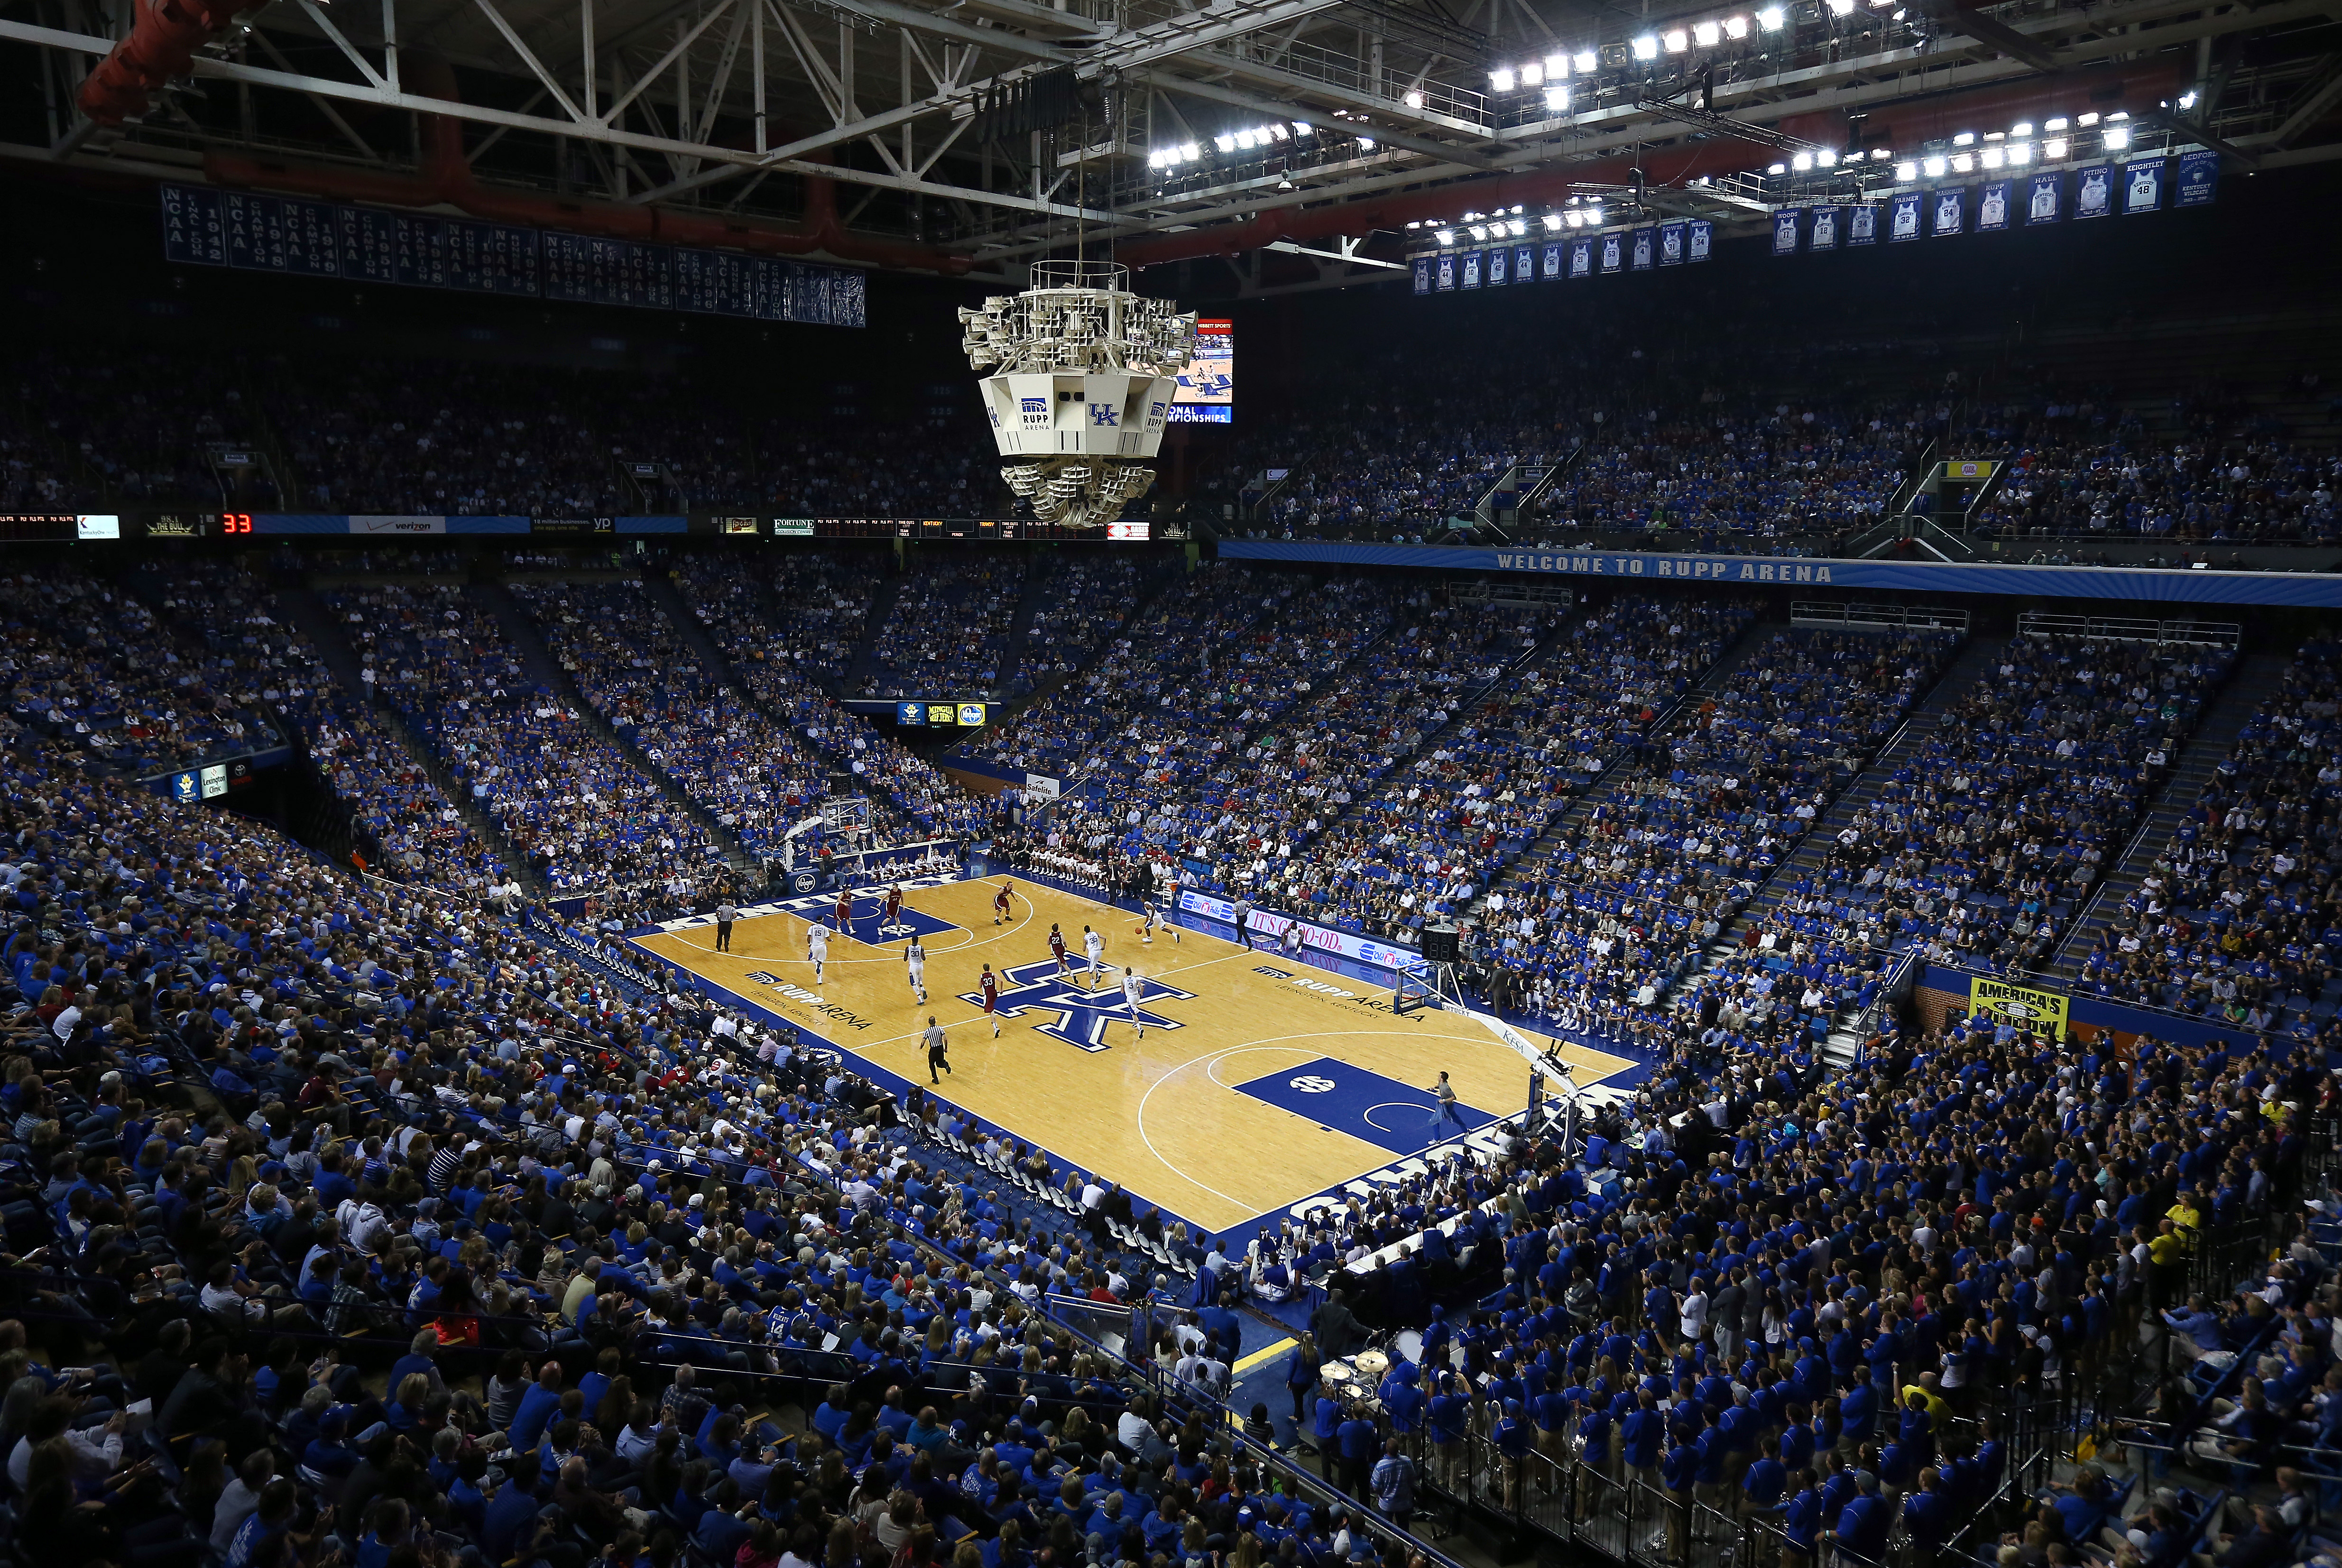 Rupp Arena/USA TODAY Sports